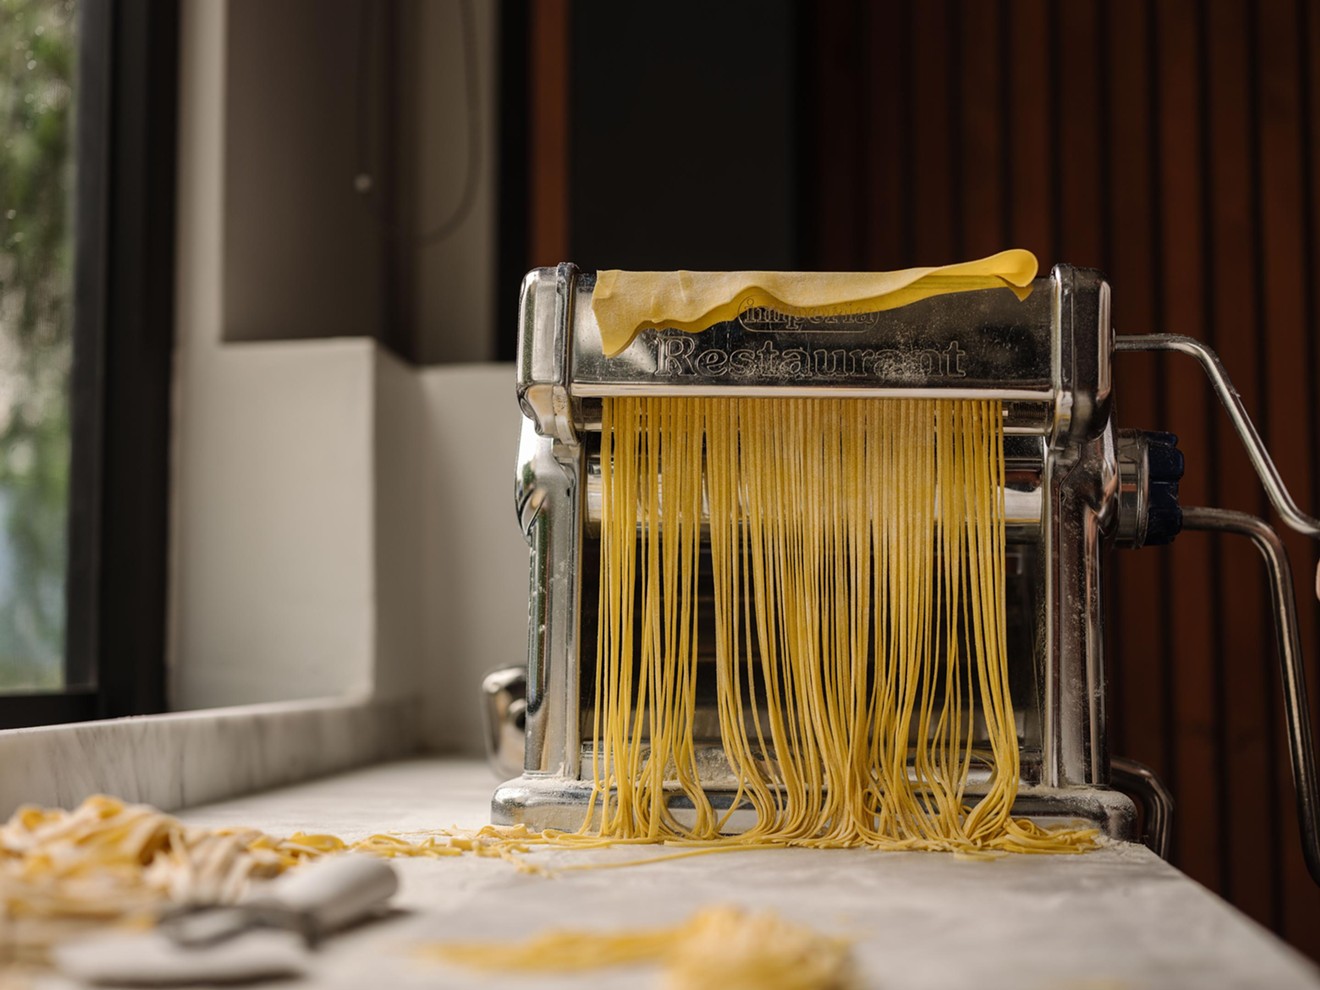 The menu at Pasta in Wynwood will feature 12 pastas with each noodle prepared fresh every morning on a window-facing countertop overlooking the streets of Wynwood.